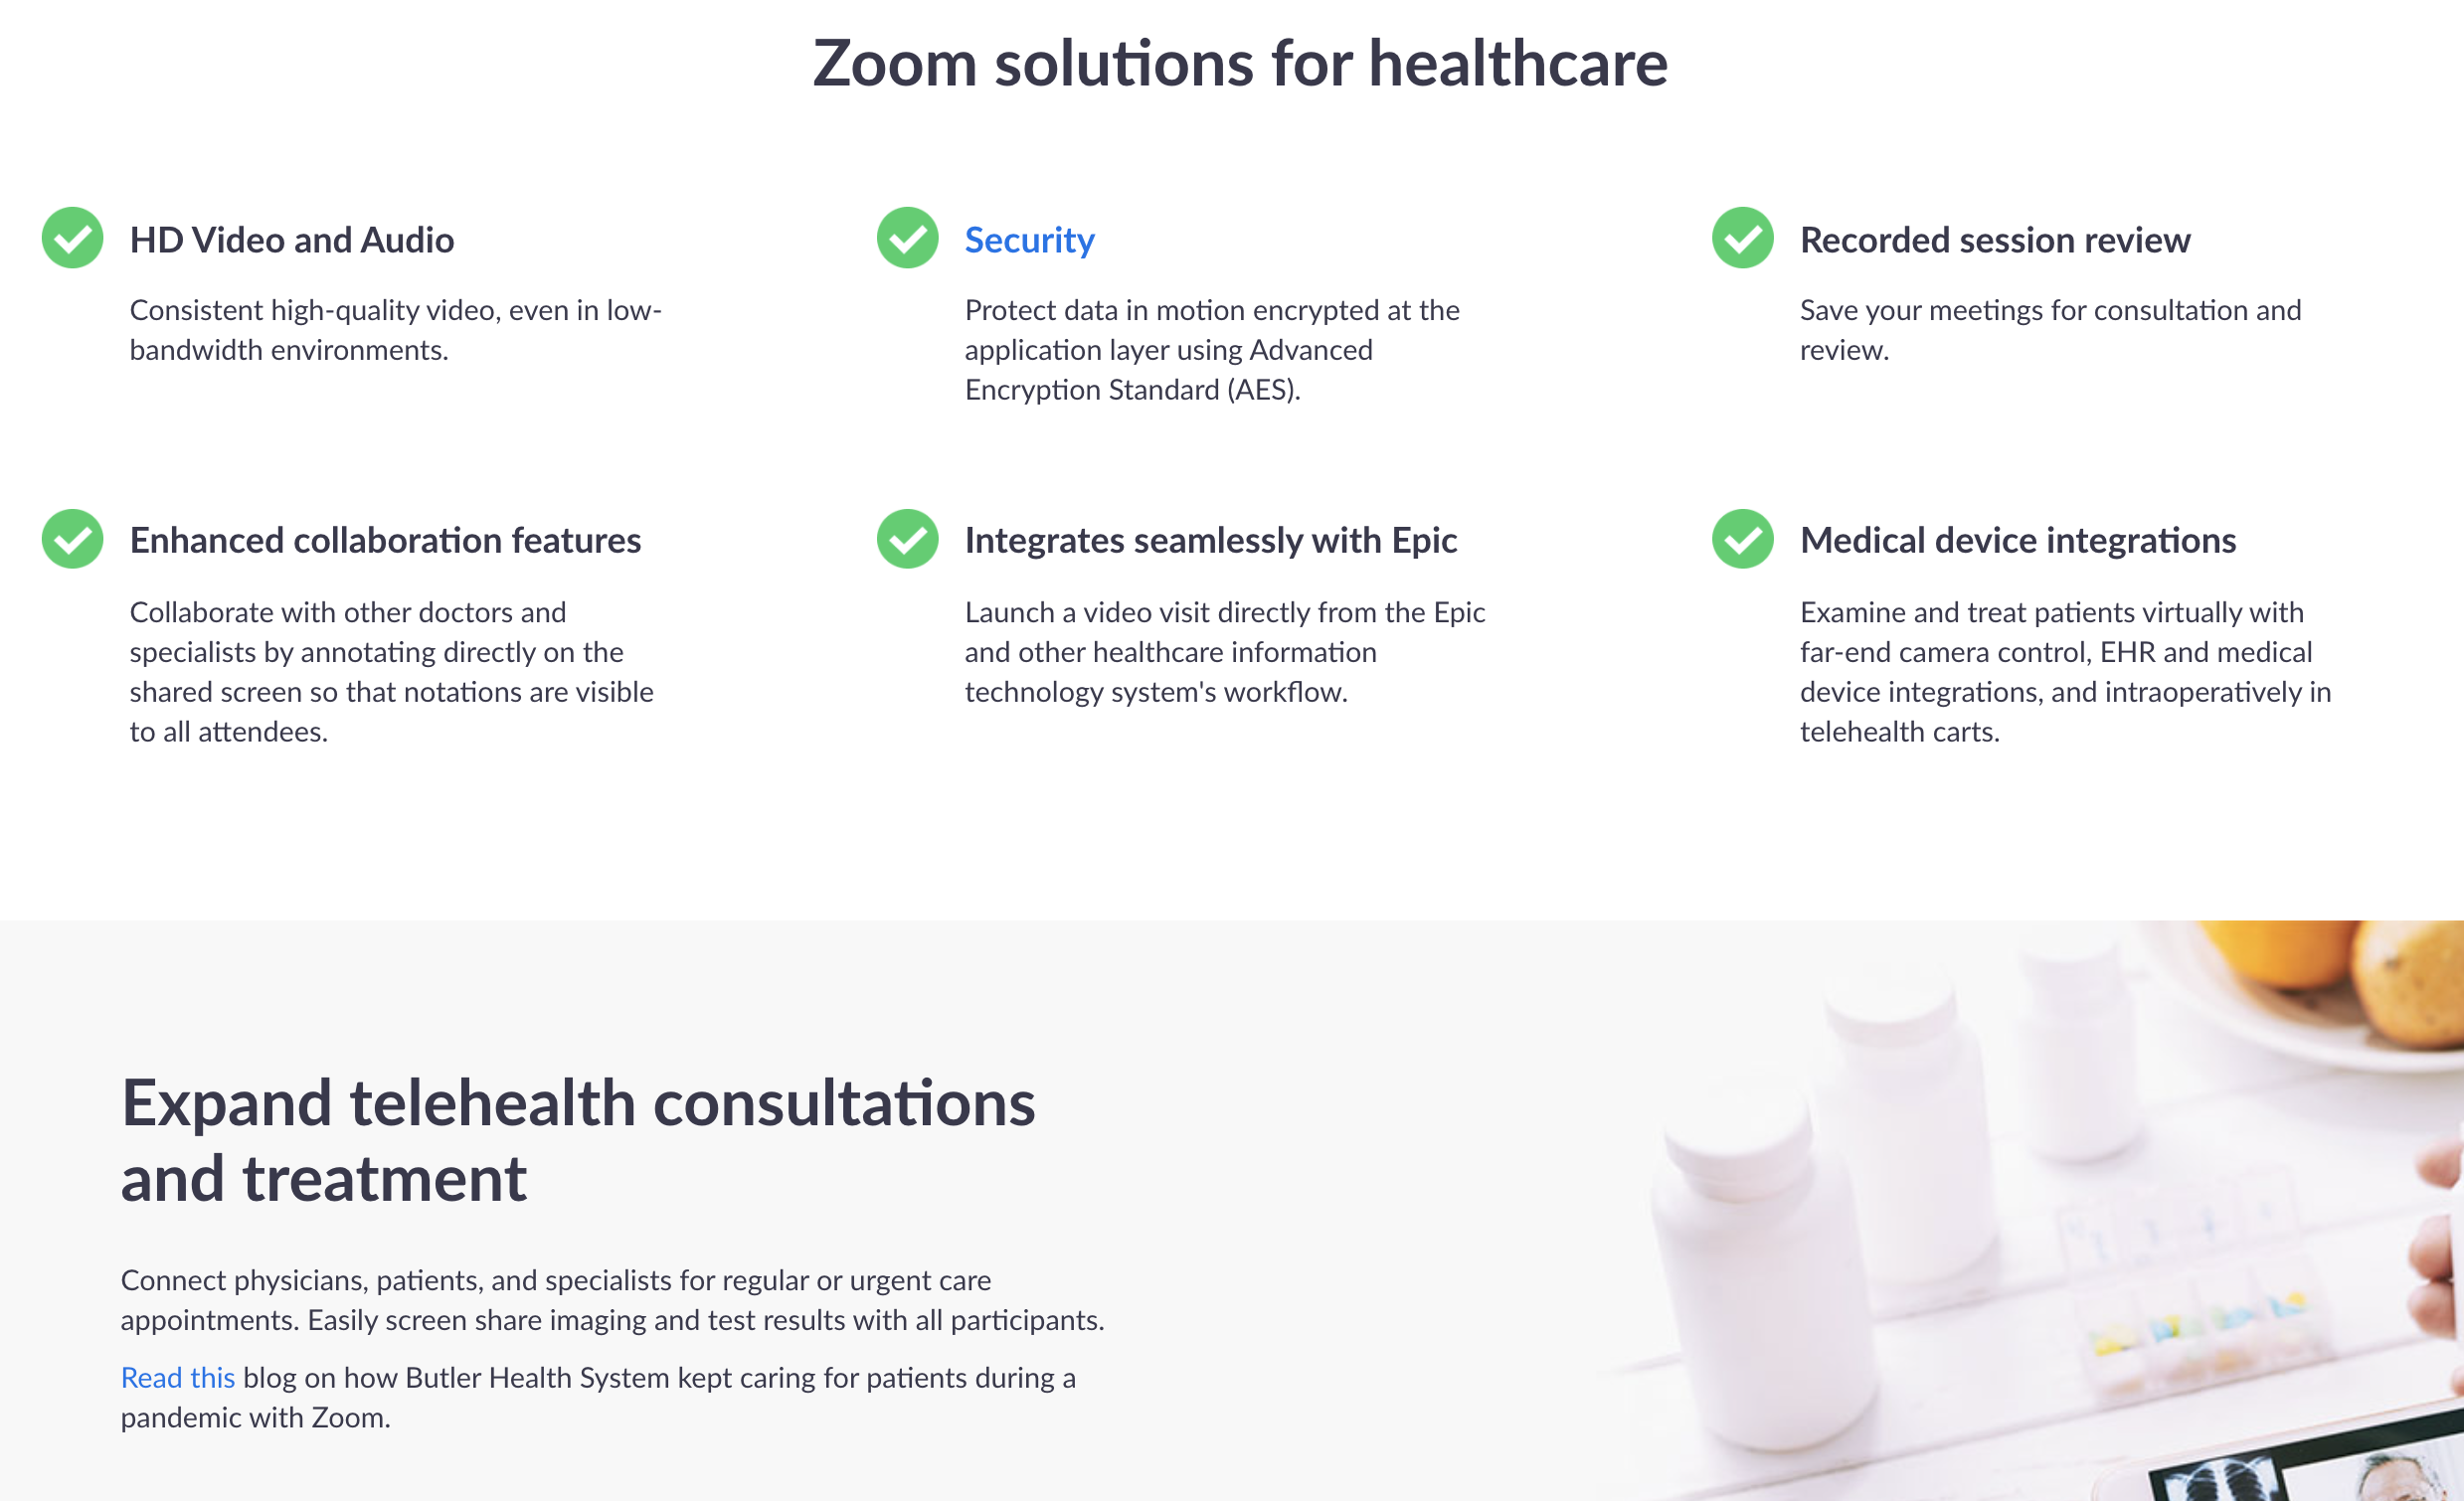 Zoom for Healthcare